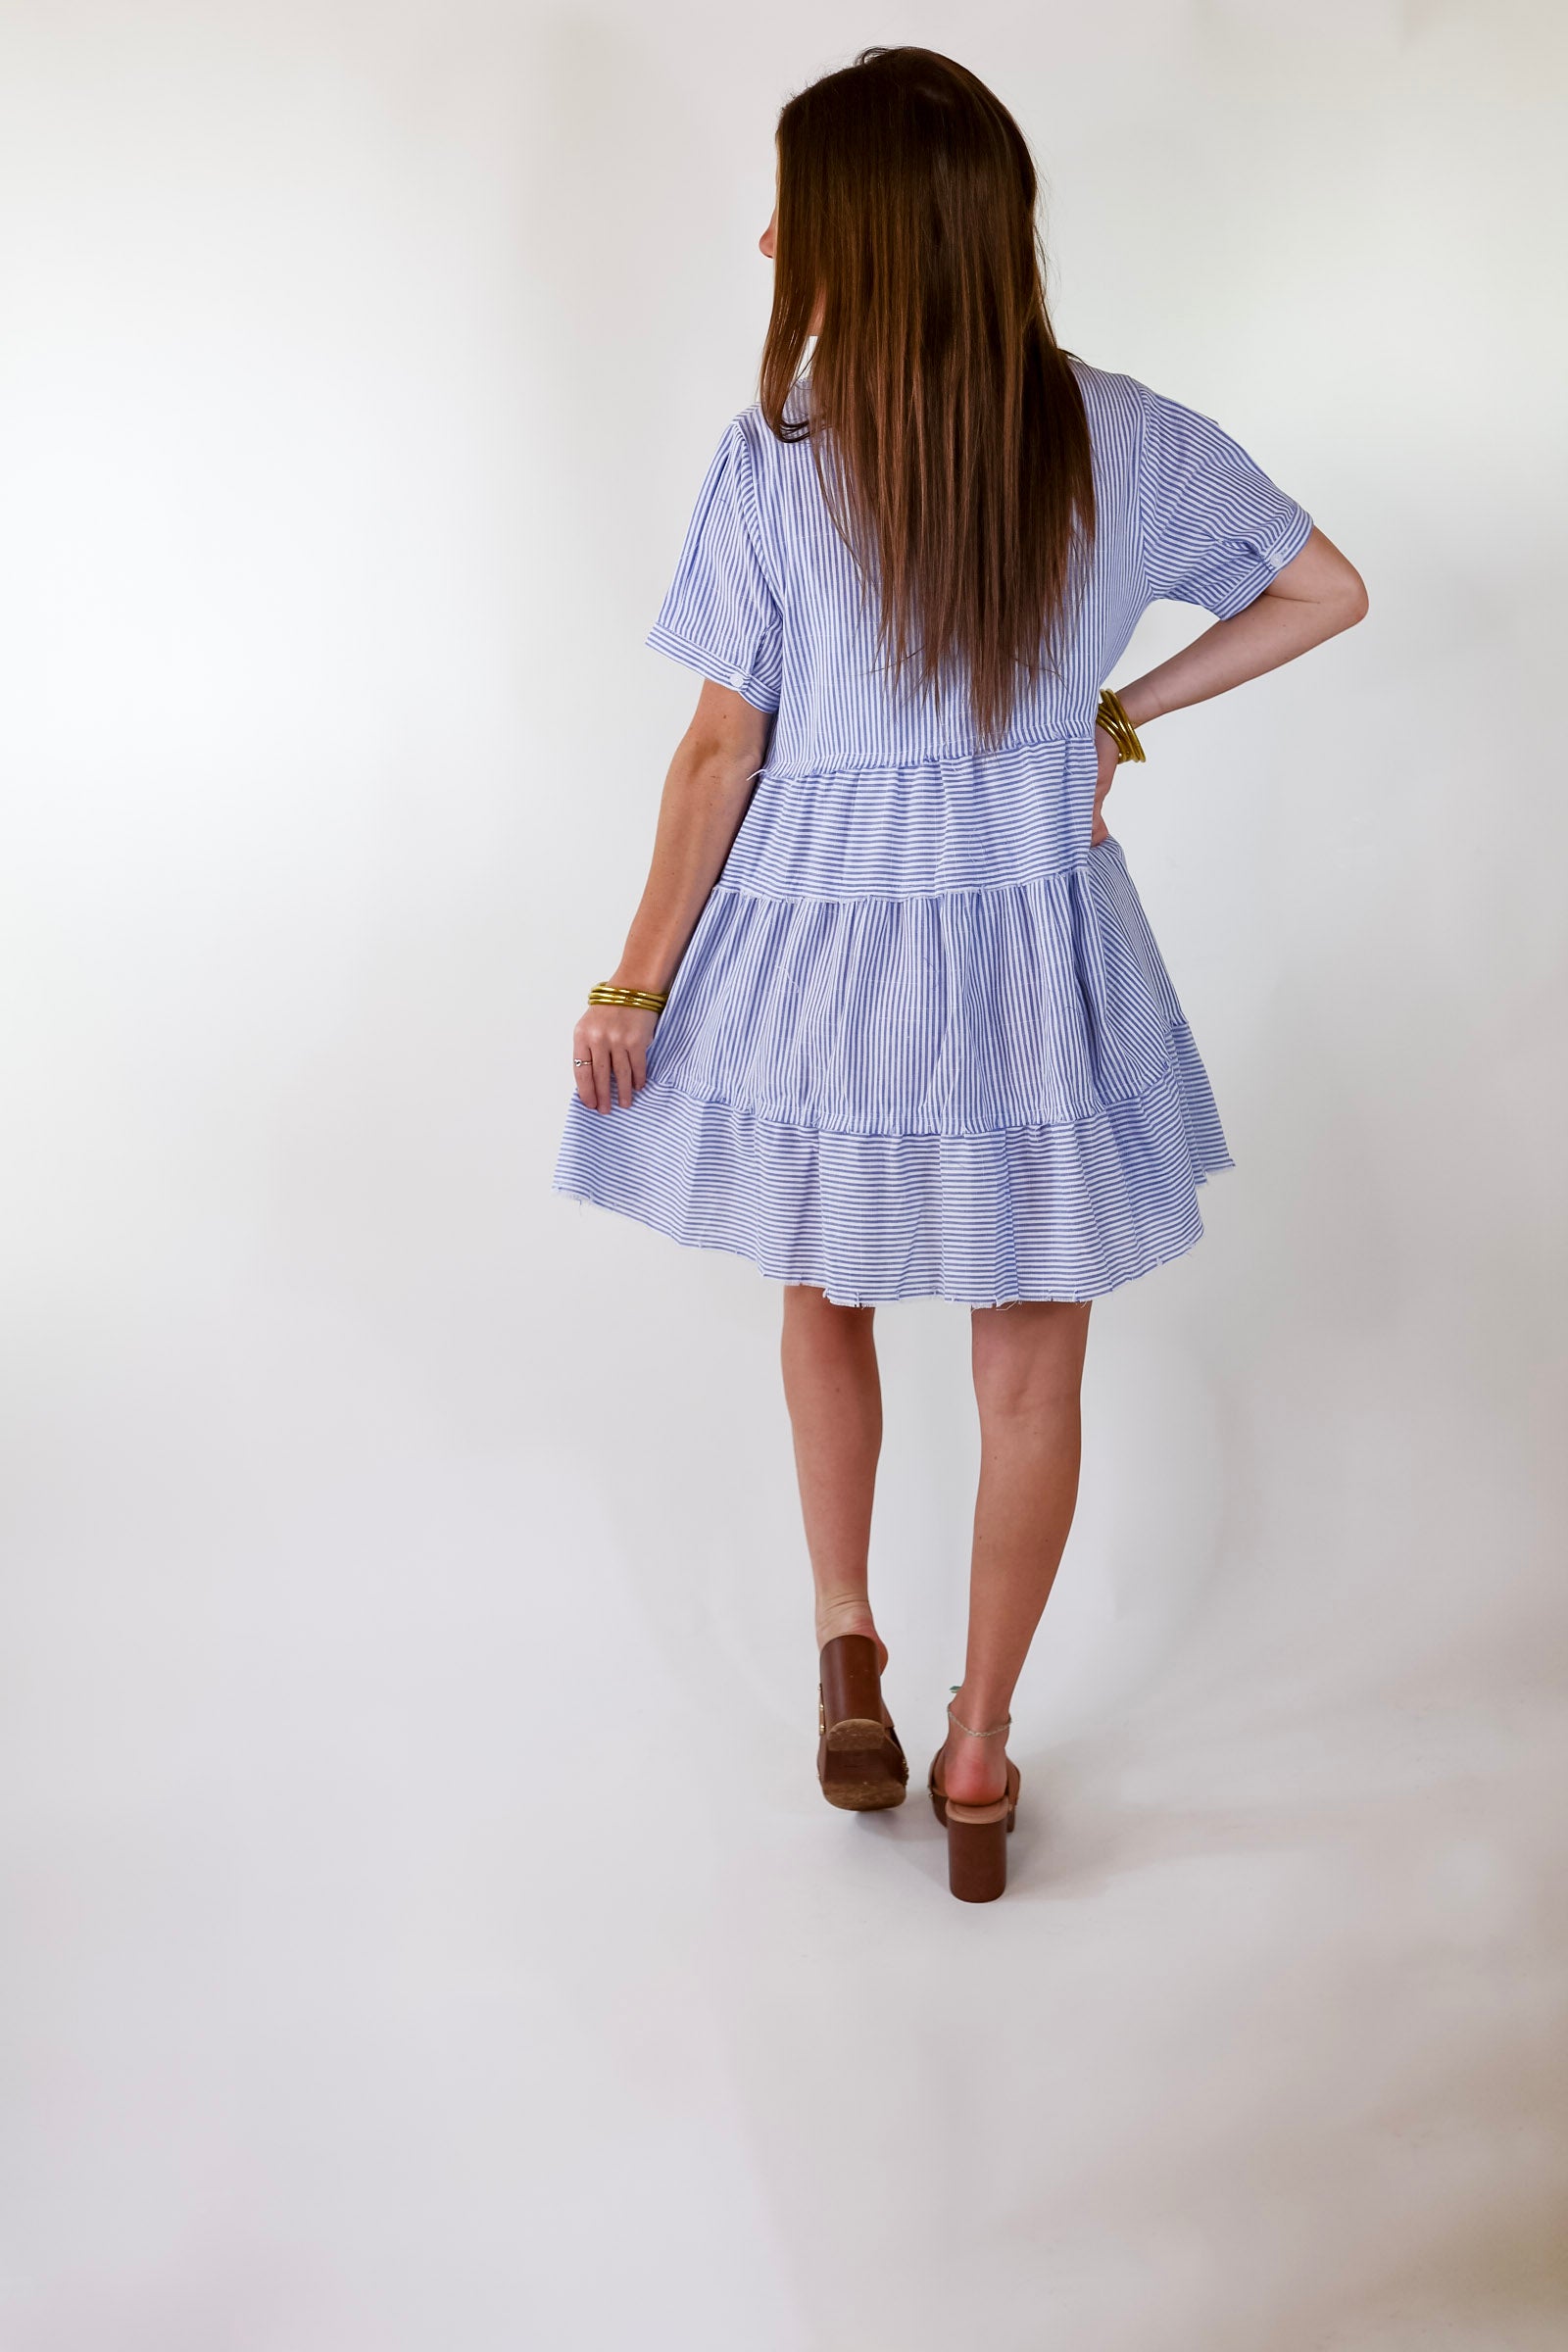 Casual Greetings Collared Pinstripe Dress in Blue and White - Giddy Up Glamour Boutique